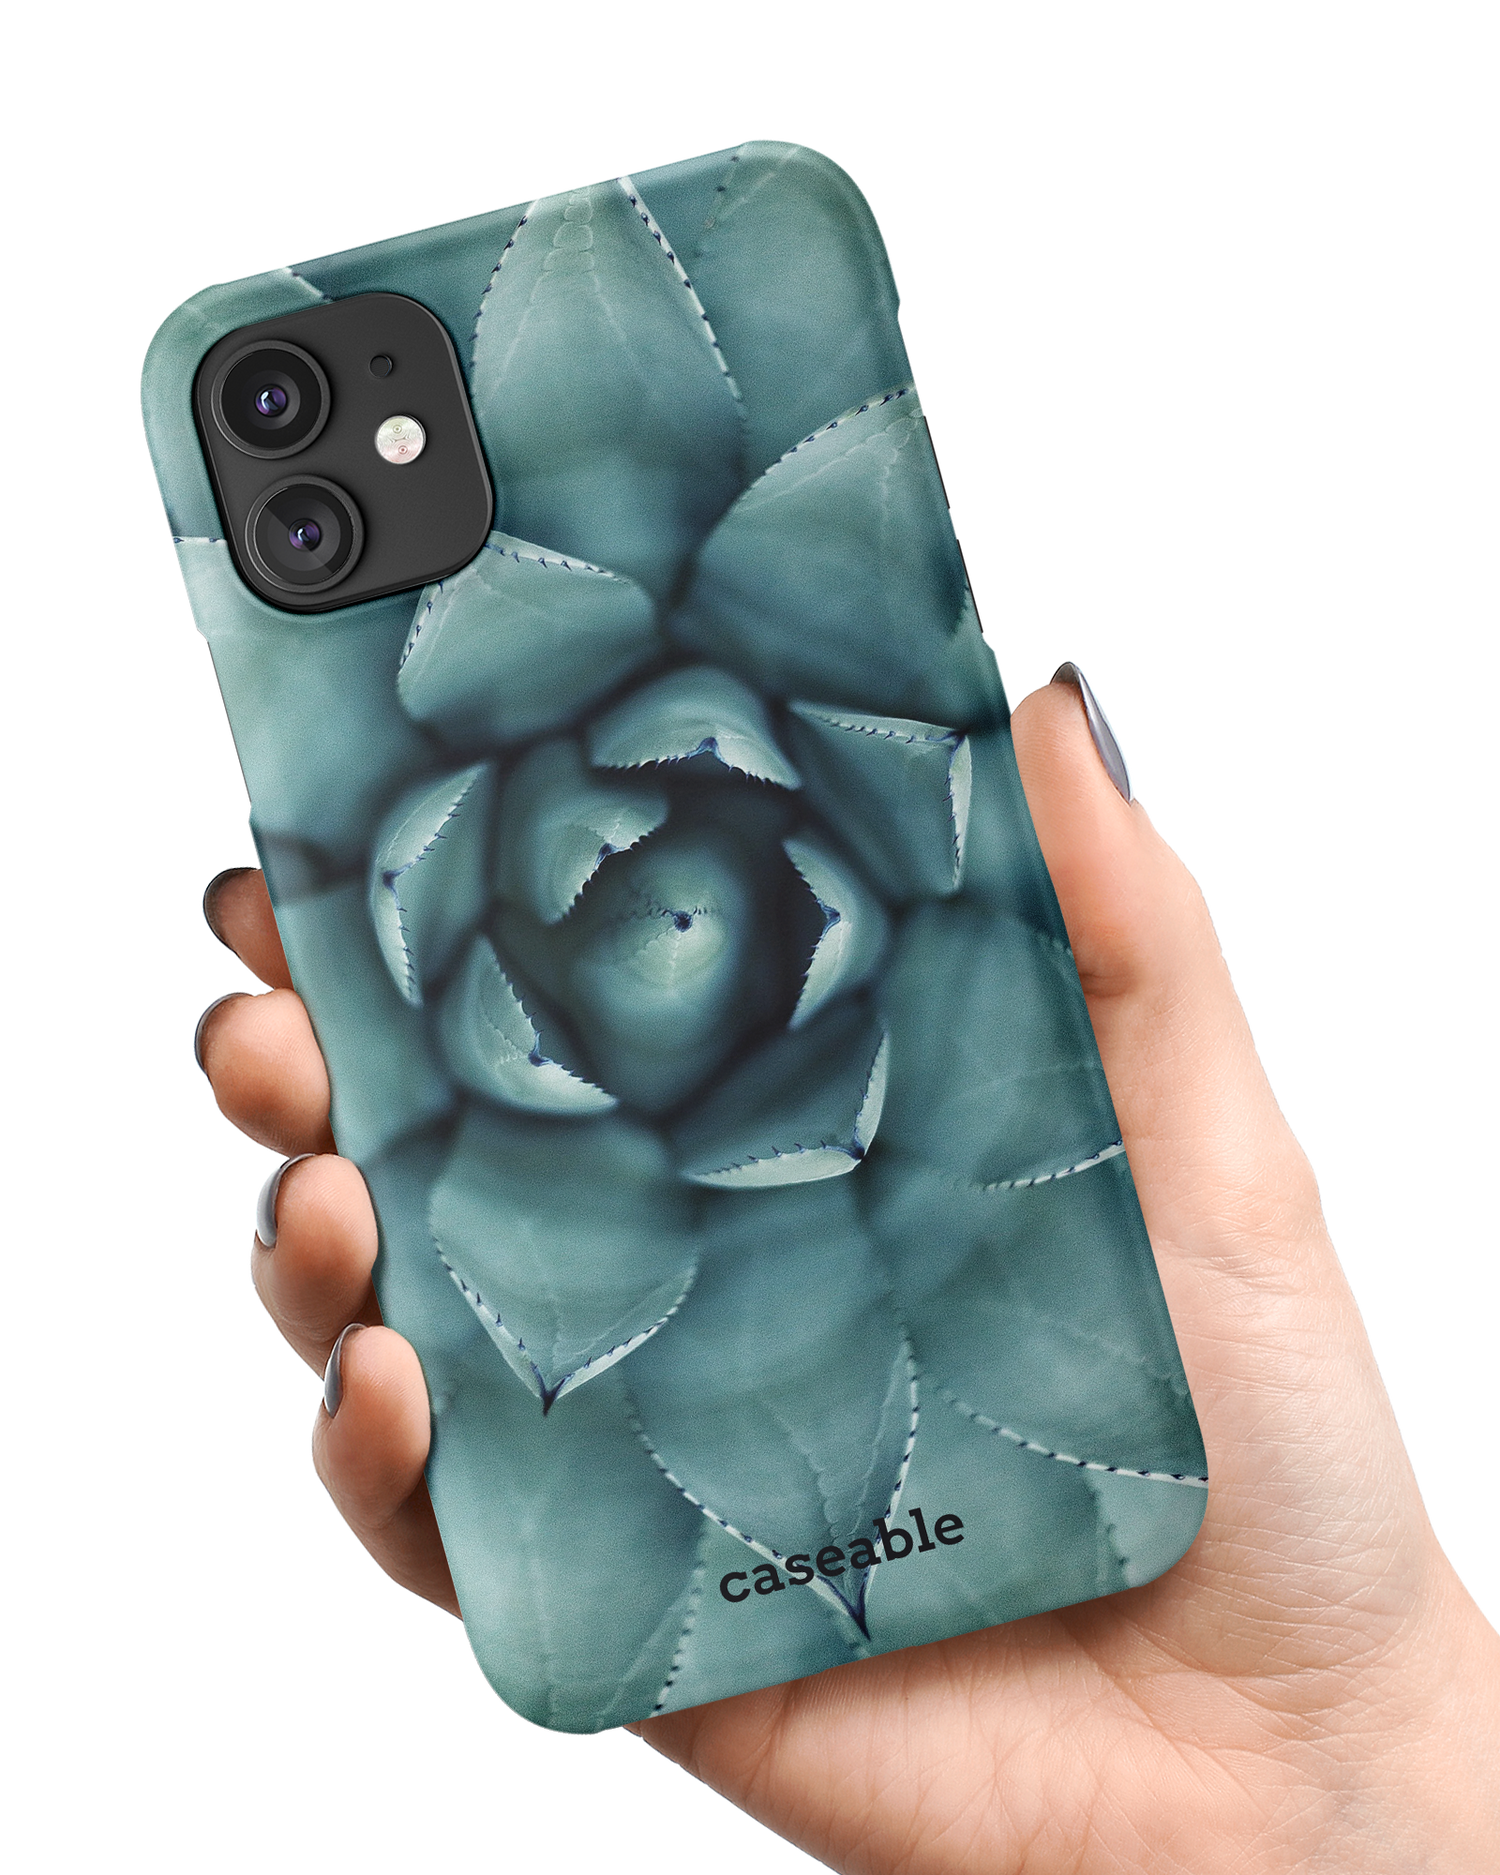 Beautiful Succulent Hard Shell Phone Case Apple iPhone 11 held in hand